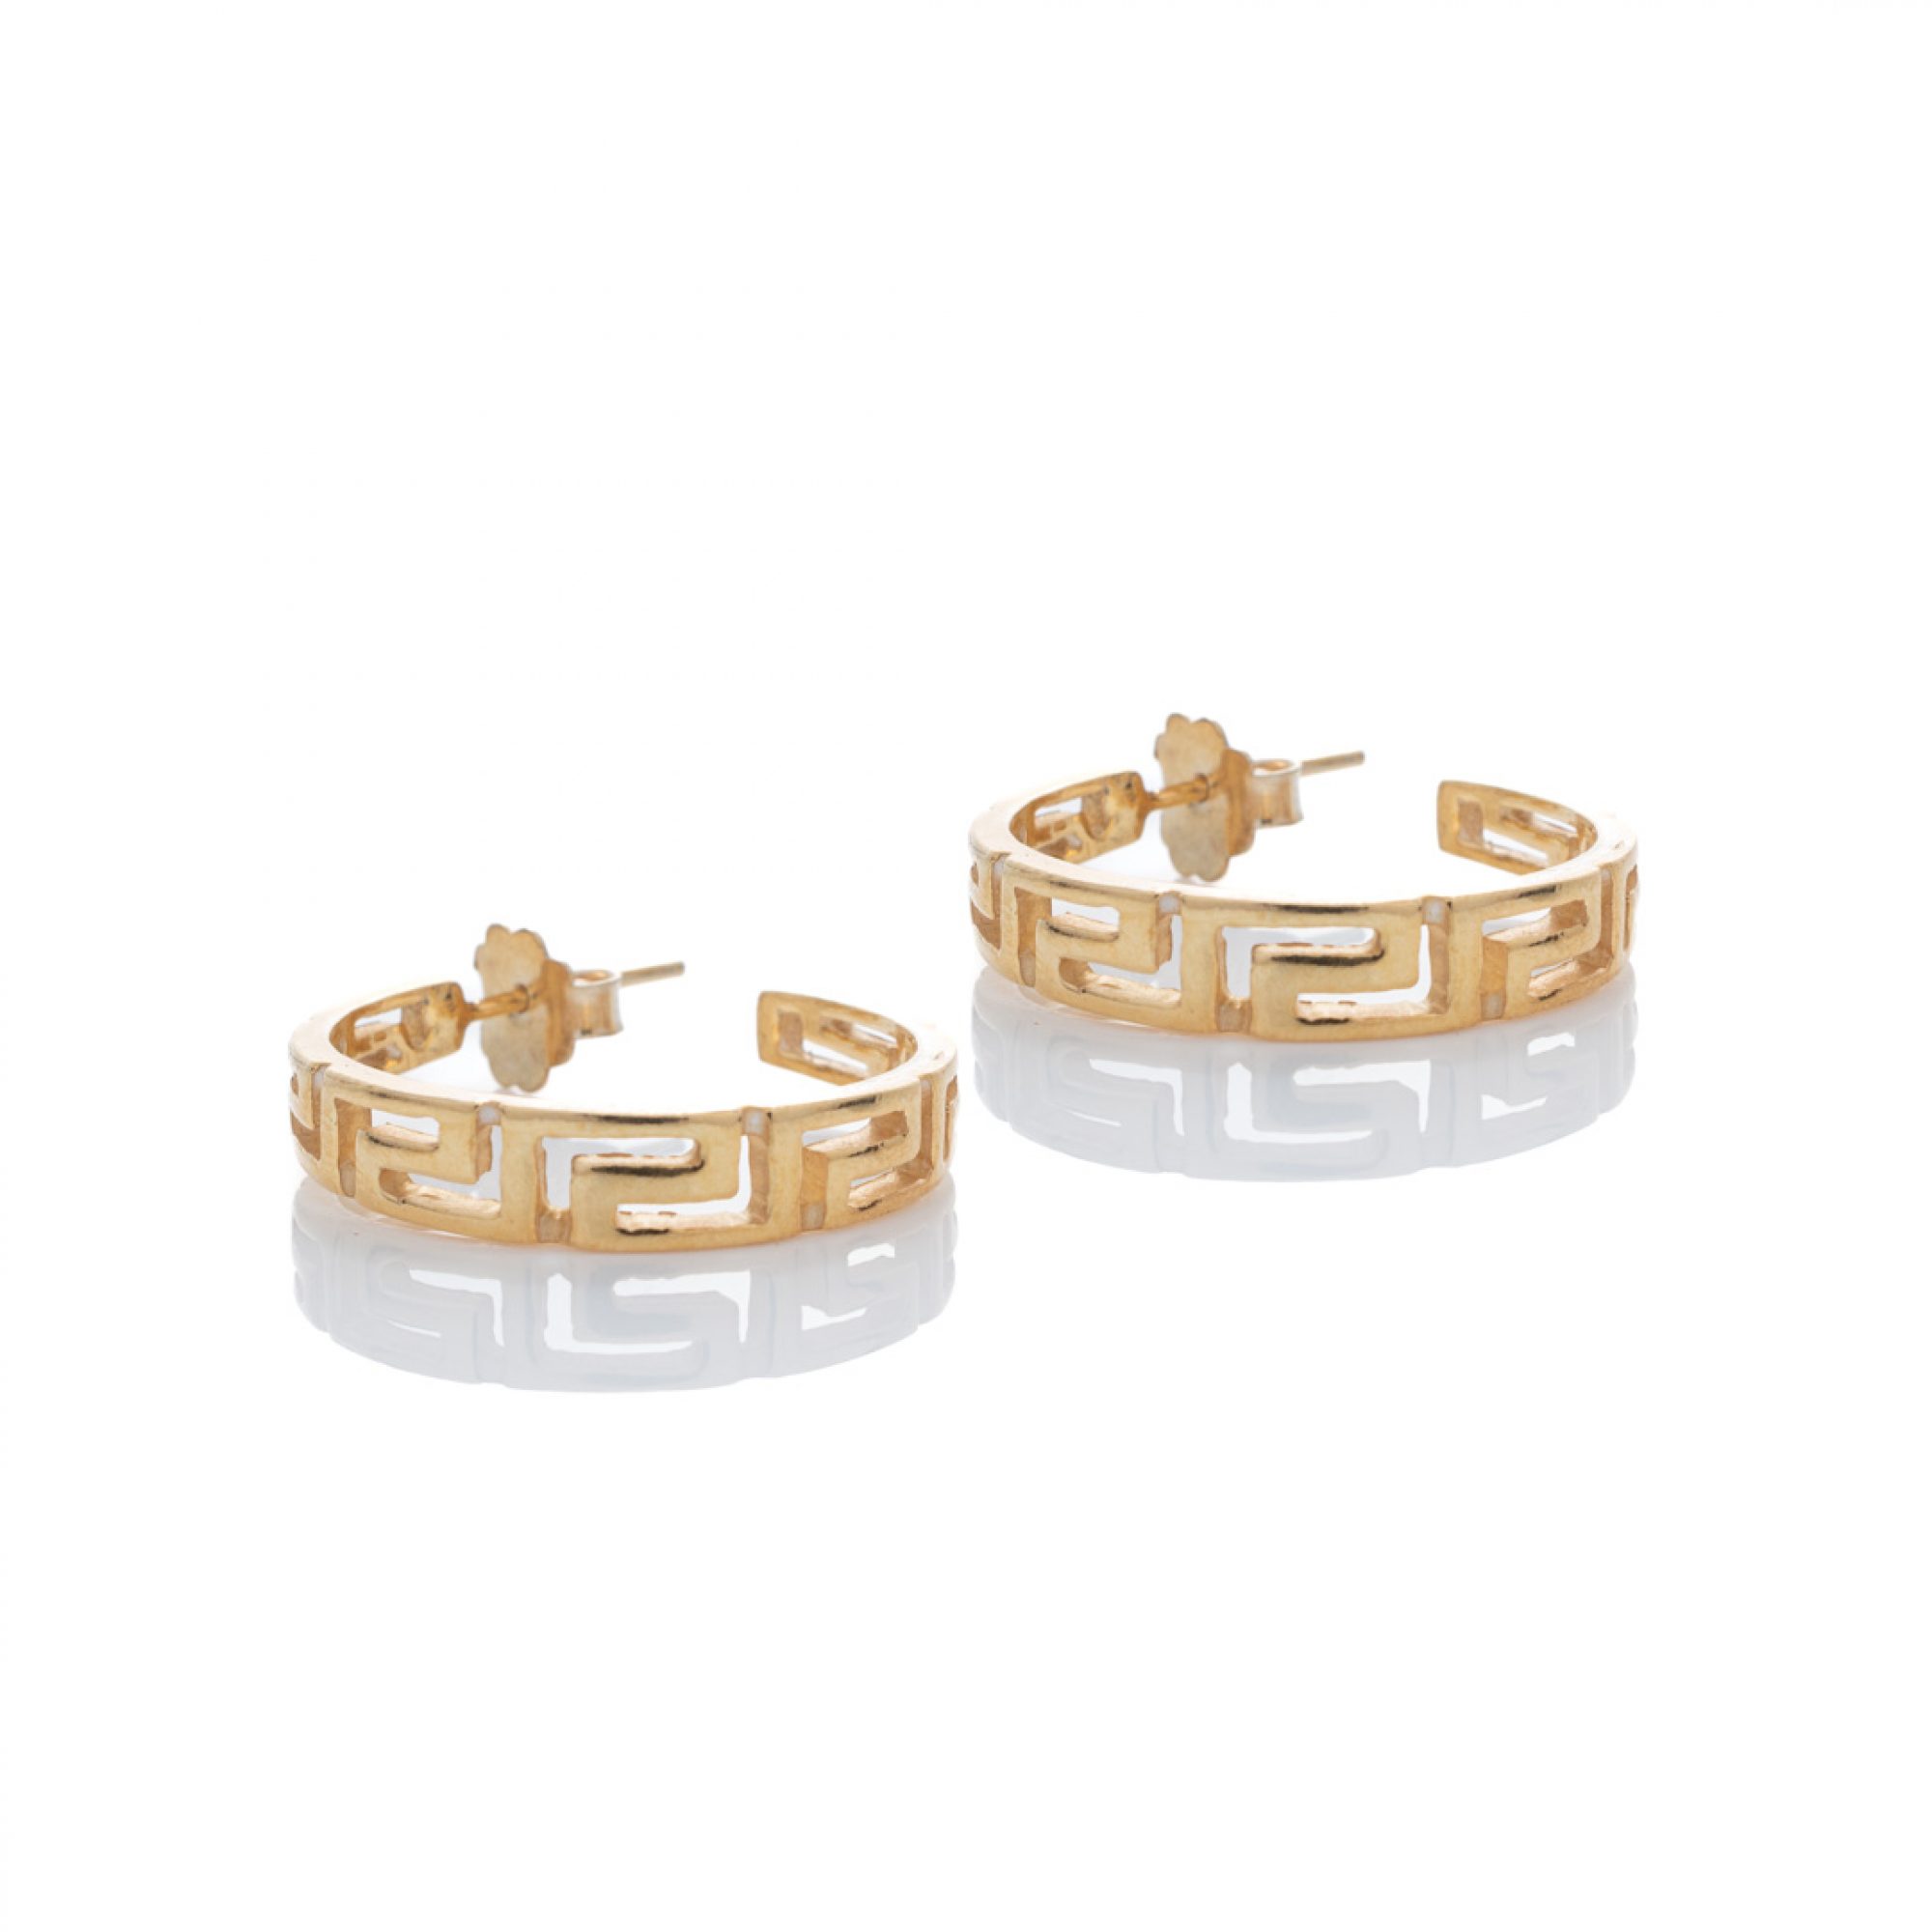 Gold plated meander earrings